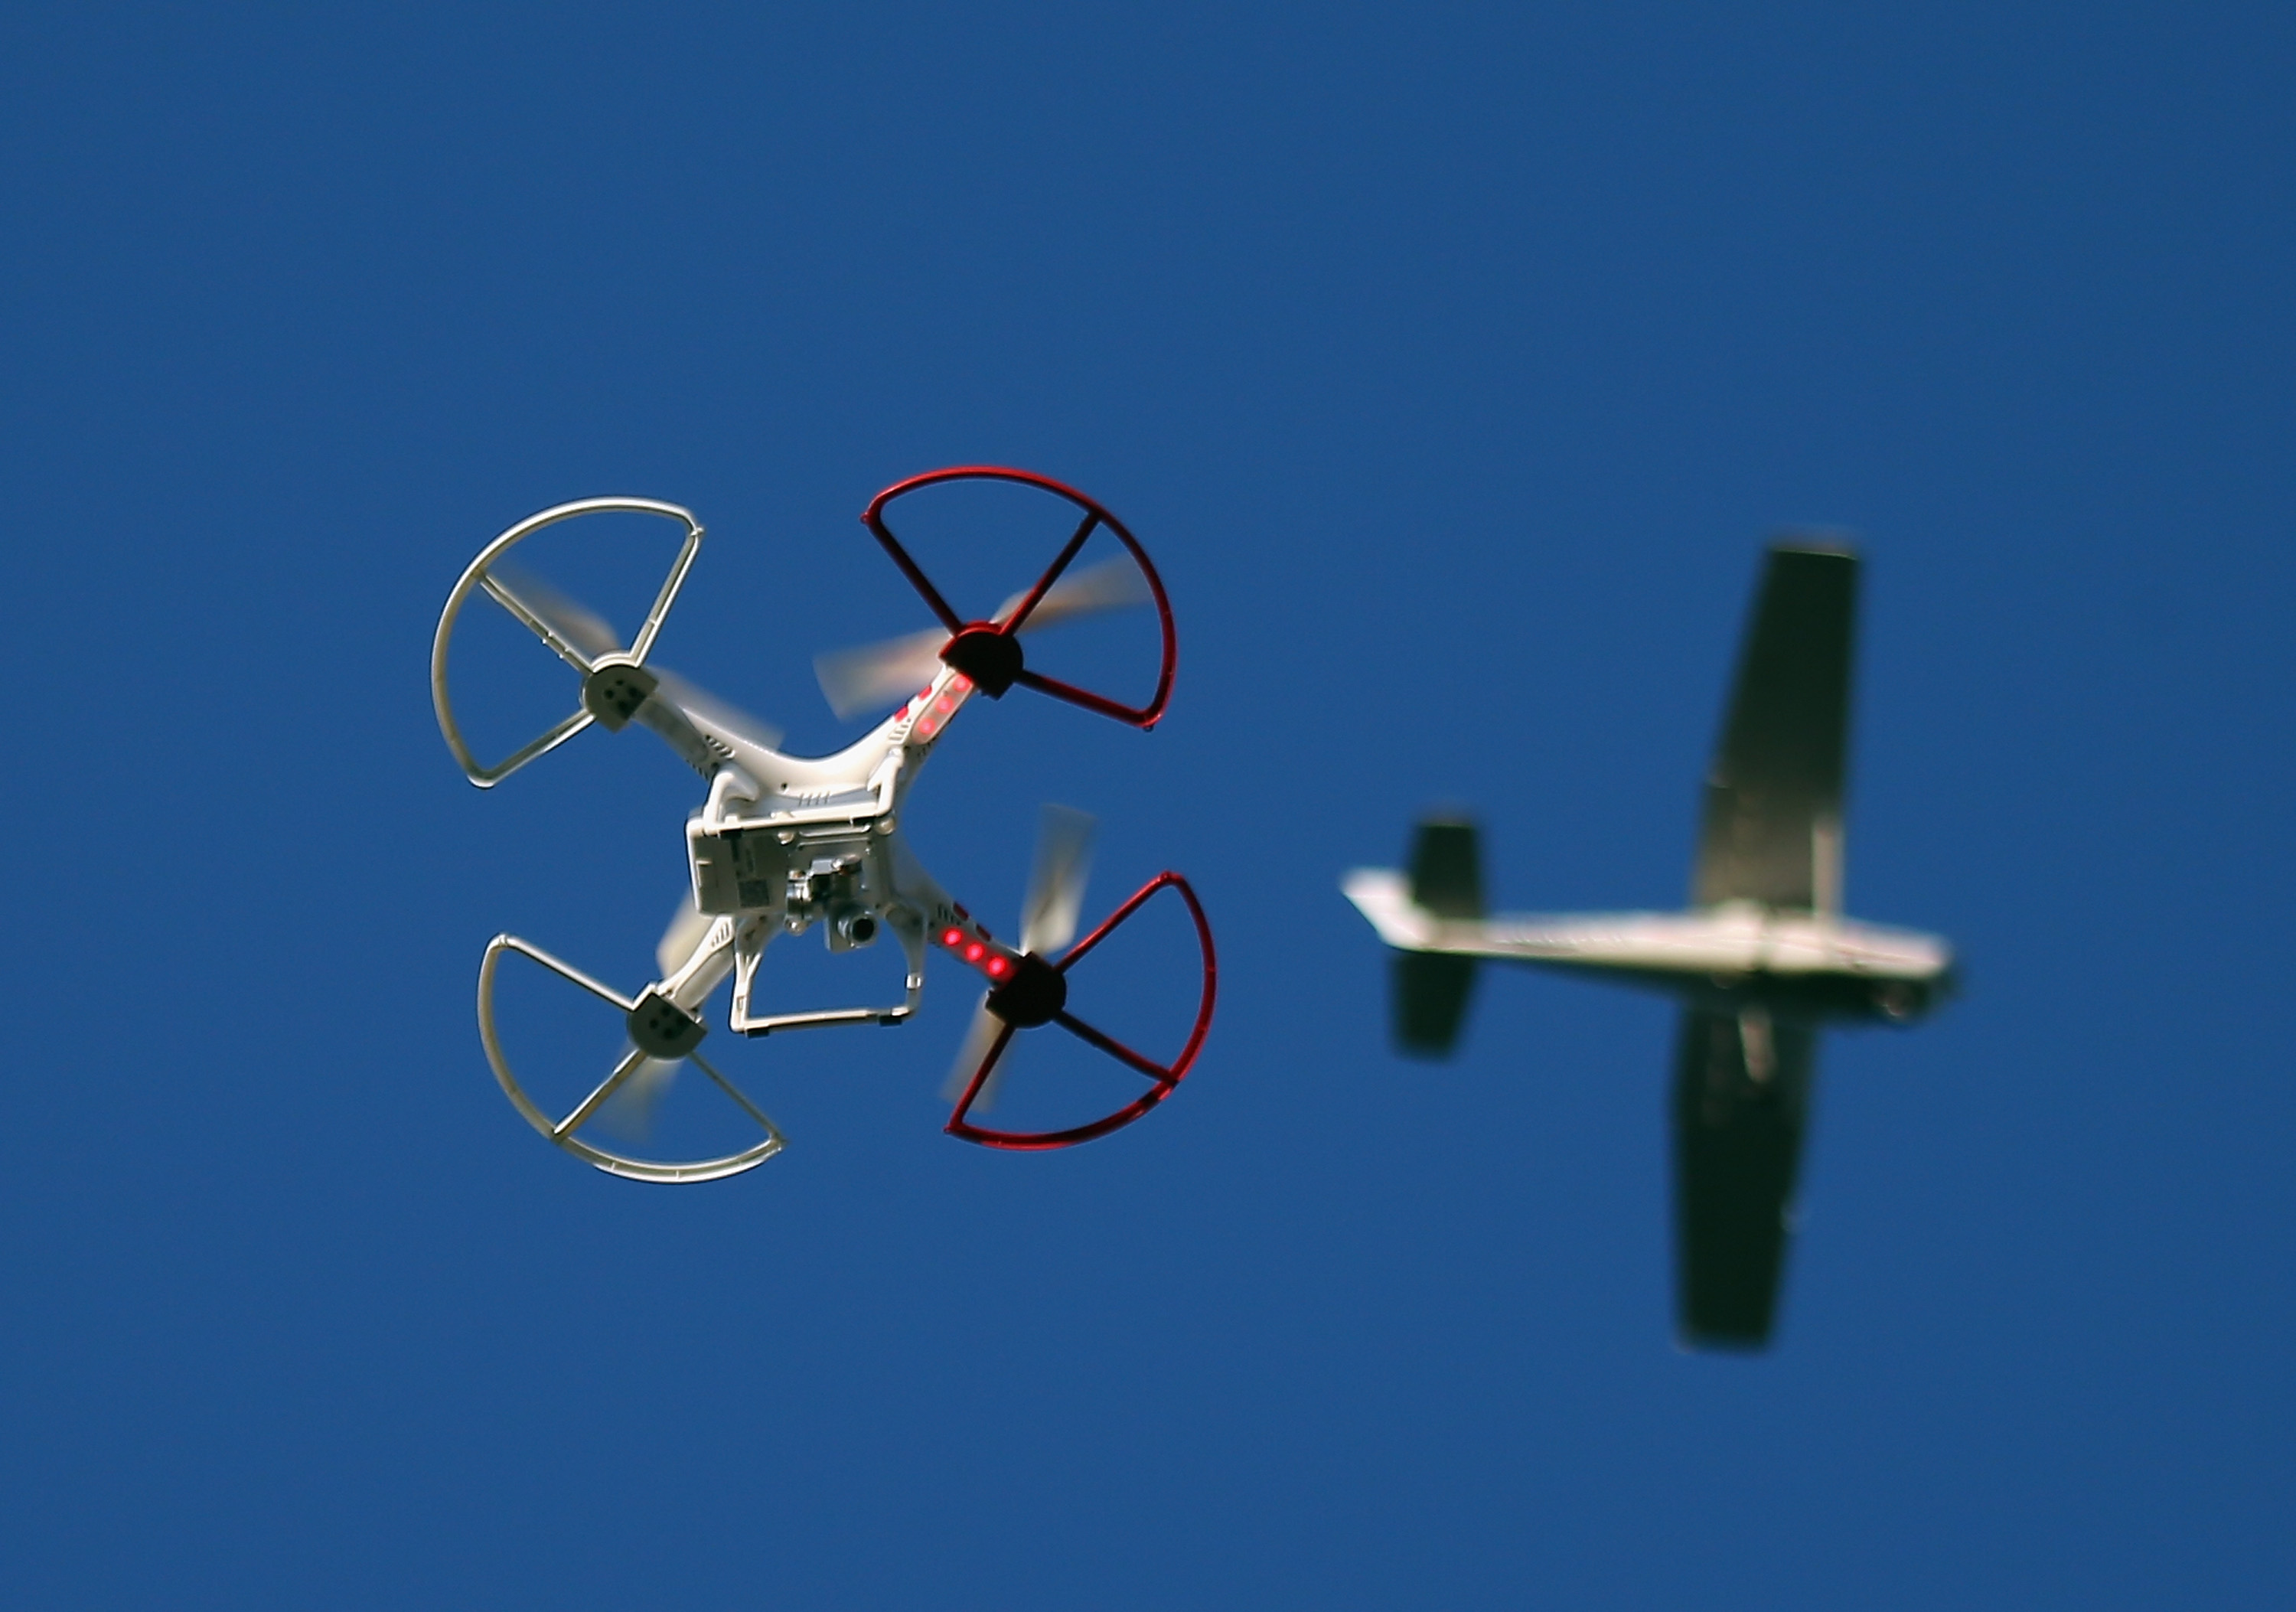 A drone is flown for recreational purposes in the sky above Old Bethpage, New York on September 5, 2015. Getty Images.